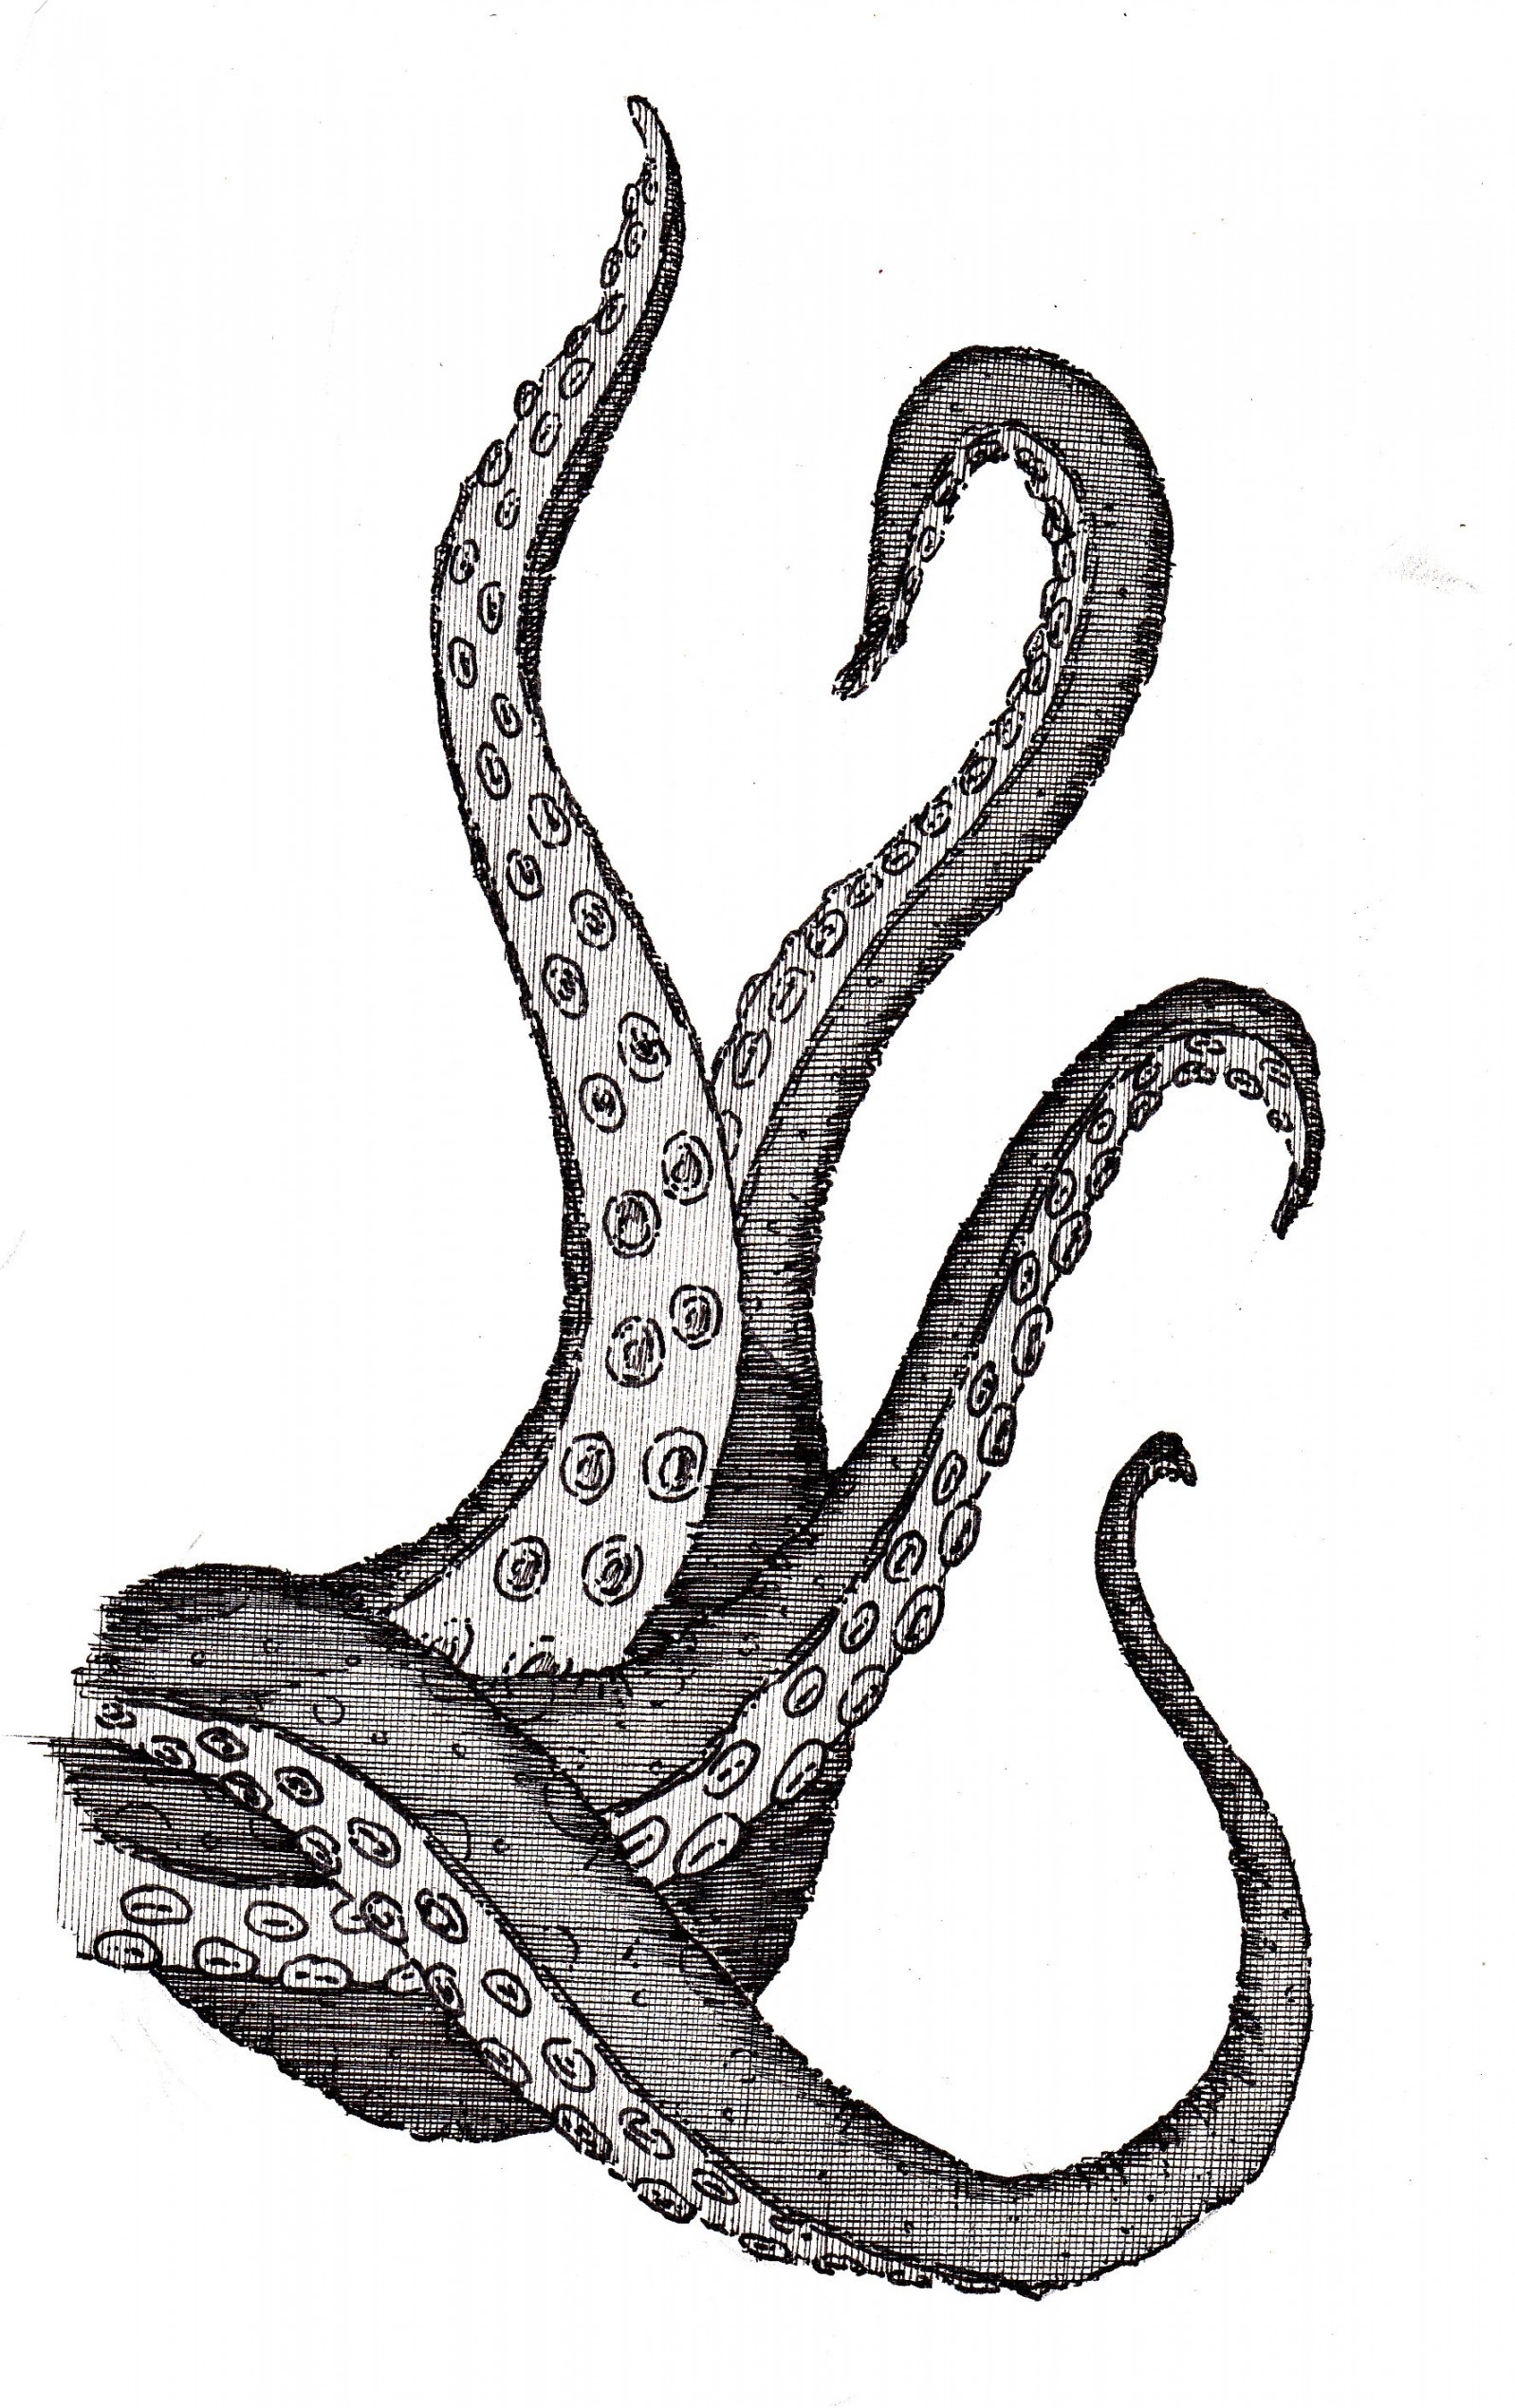 Octopus tentacles drawing, Octopus illustration, Octopus drawing